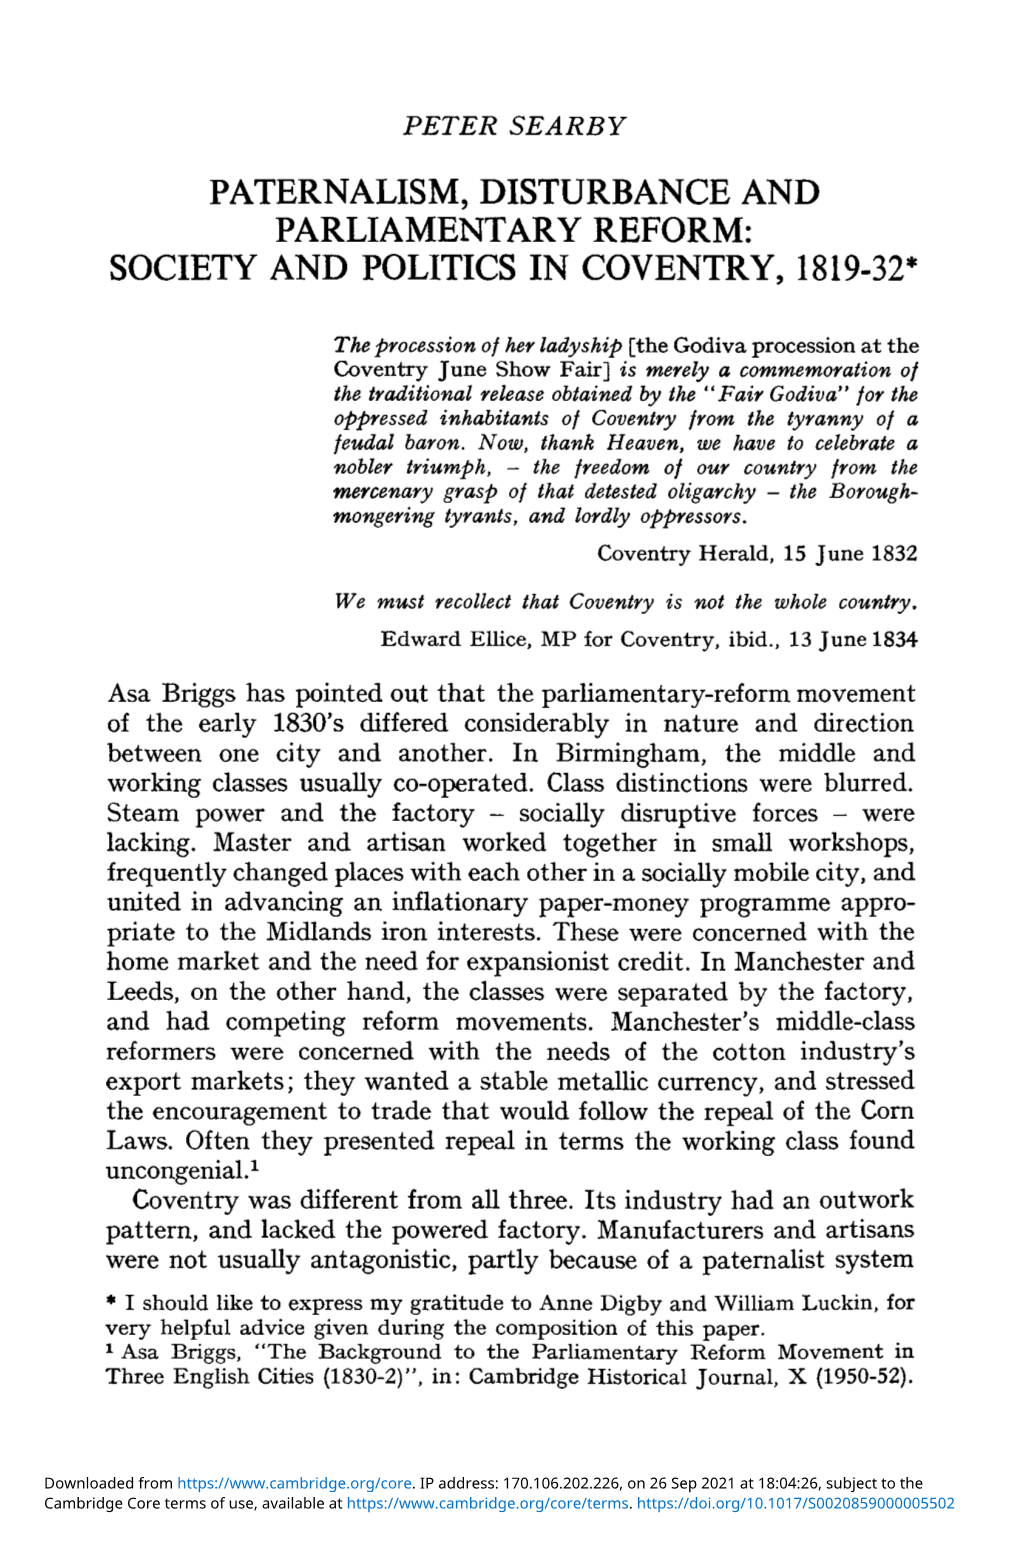 Paternalism, Disturbance and Parliamentary Reform: Society and Politics in Coventry, 1819-32*